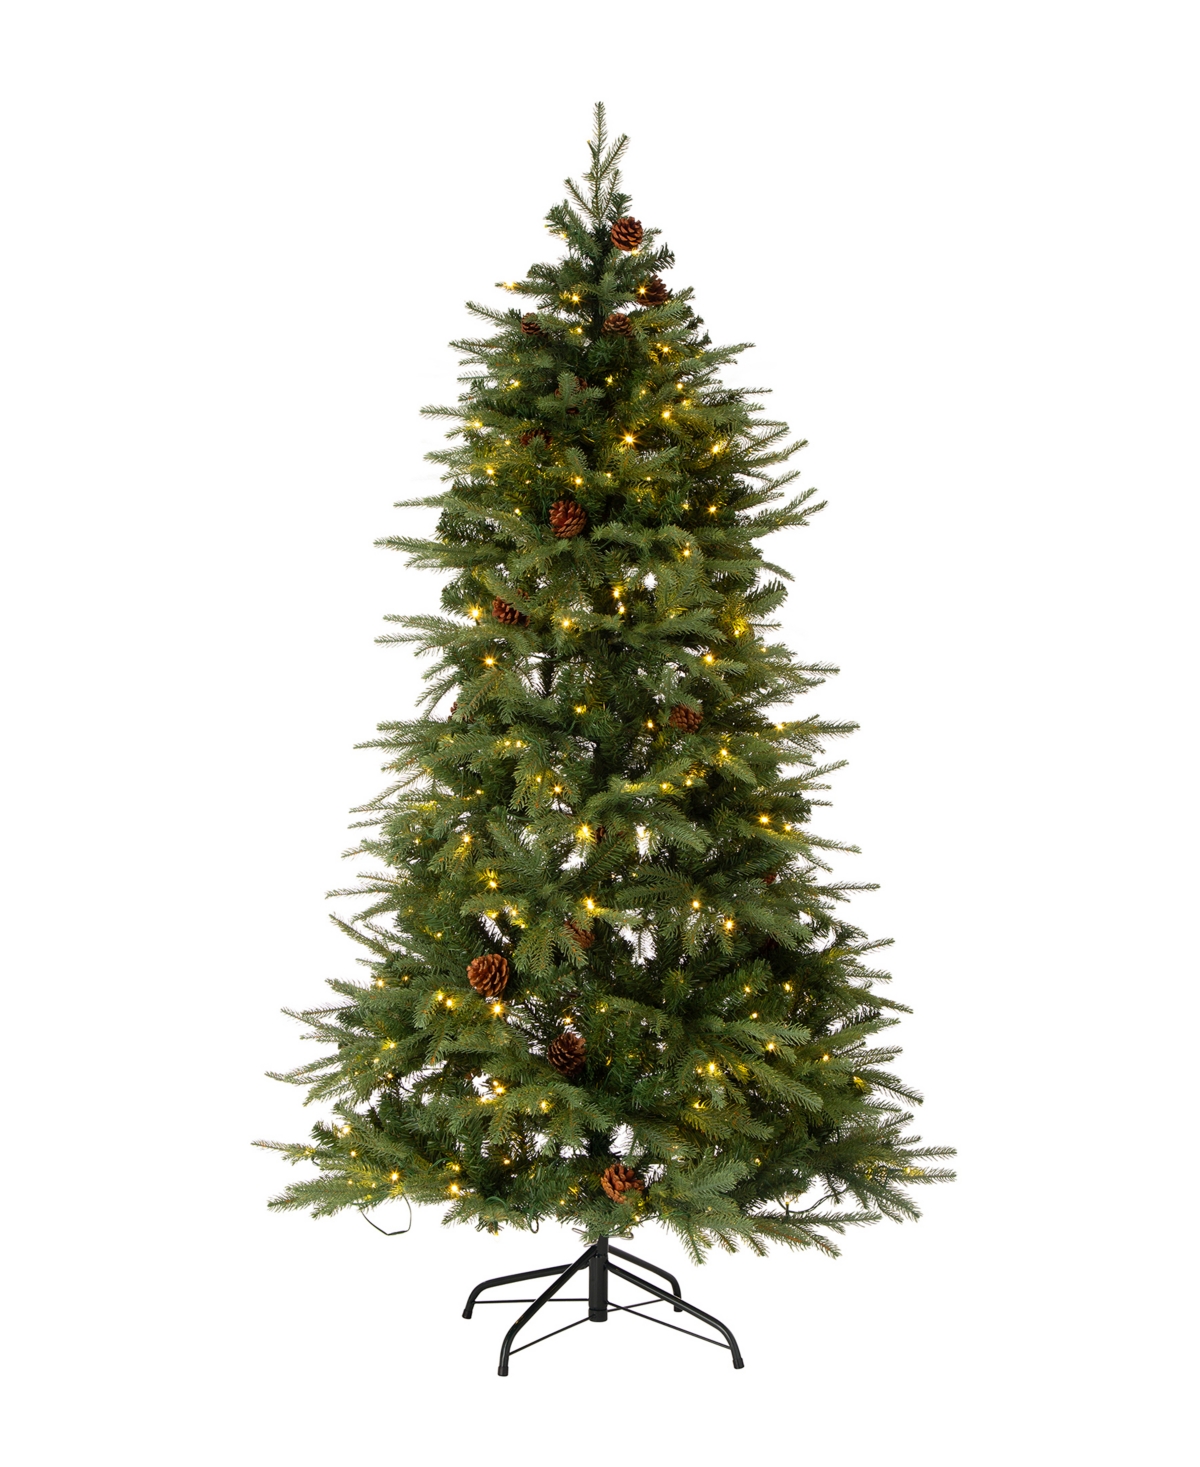 Glitzhome 6' Pre-lit Green Fir Artificial Christmas Tree With 350 Led Lights, Remote Controller